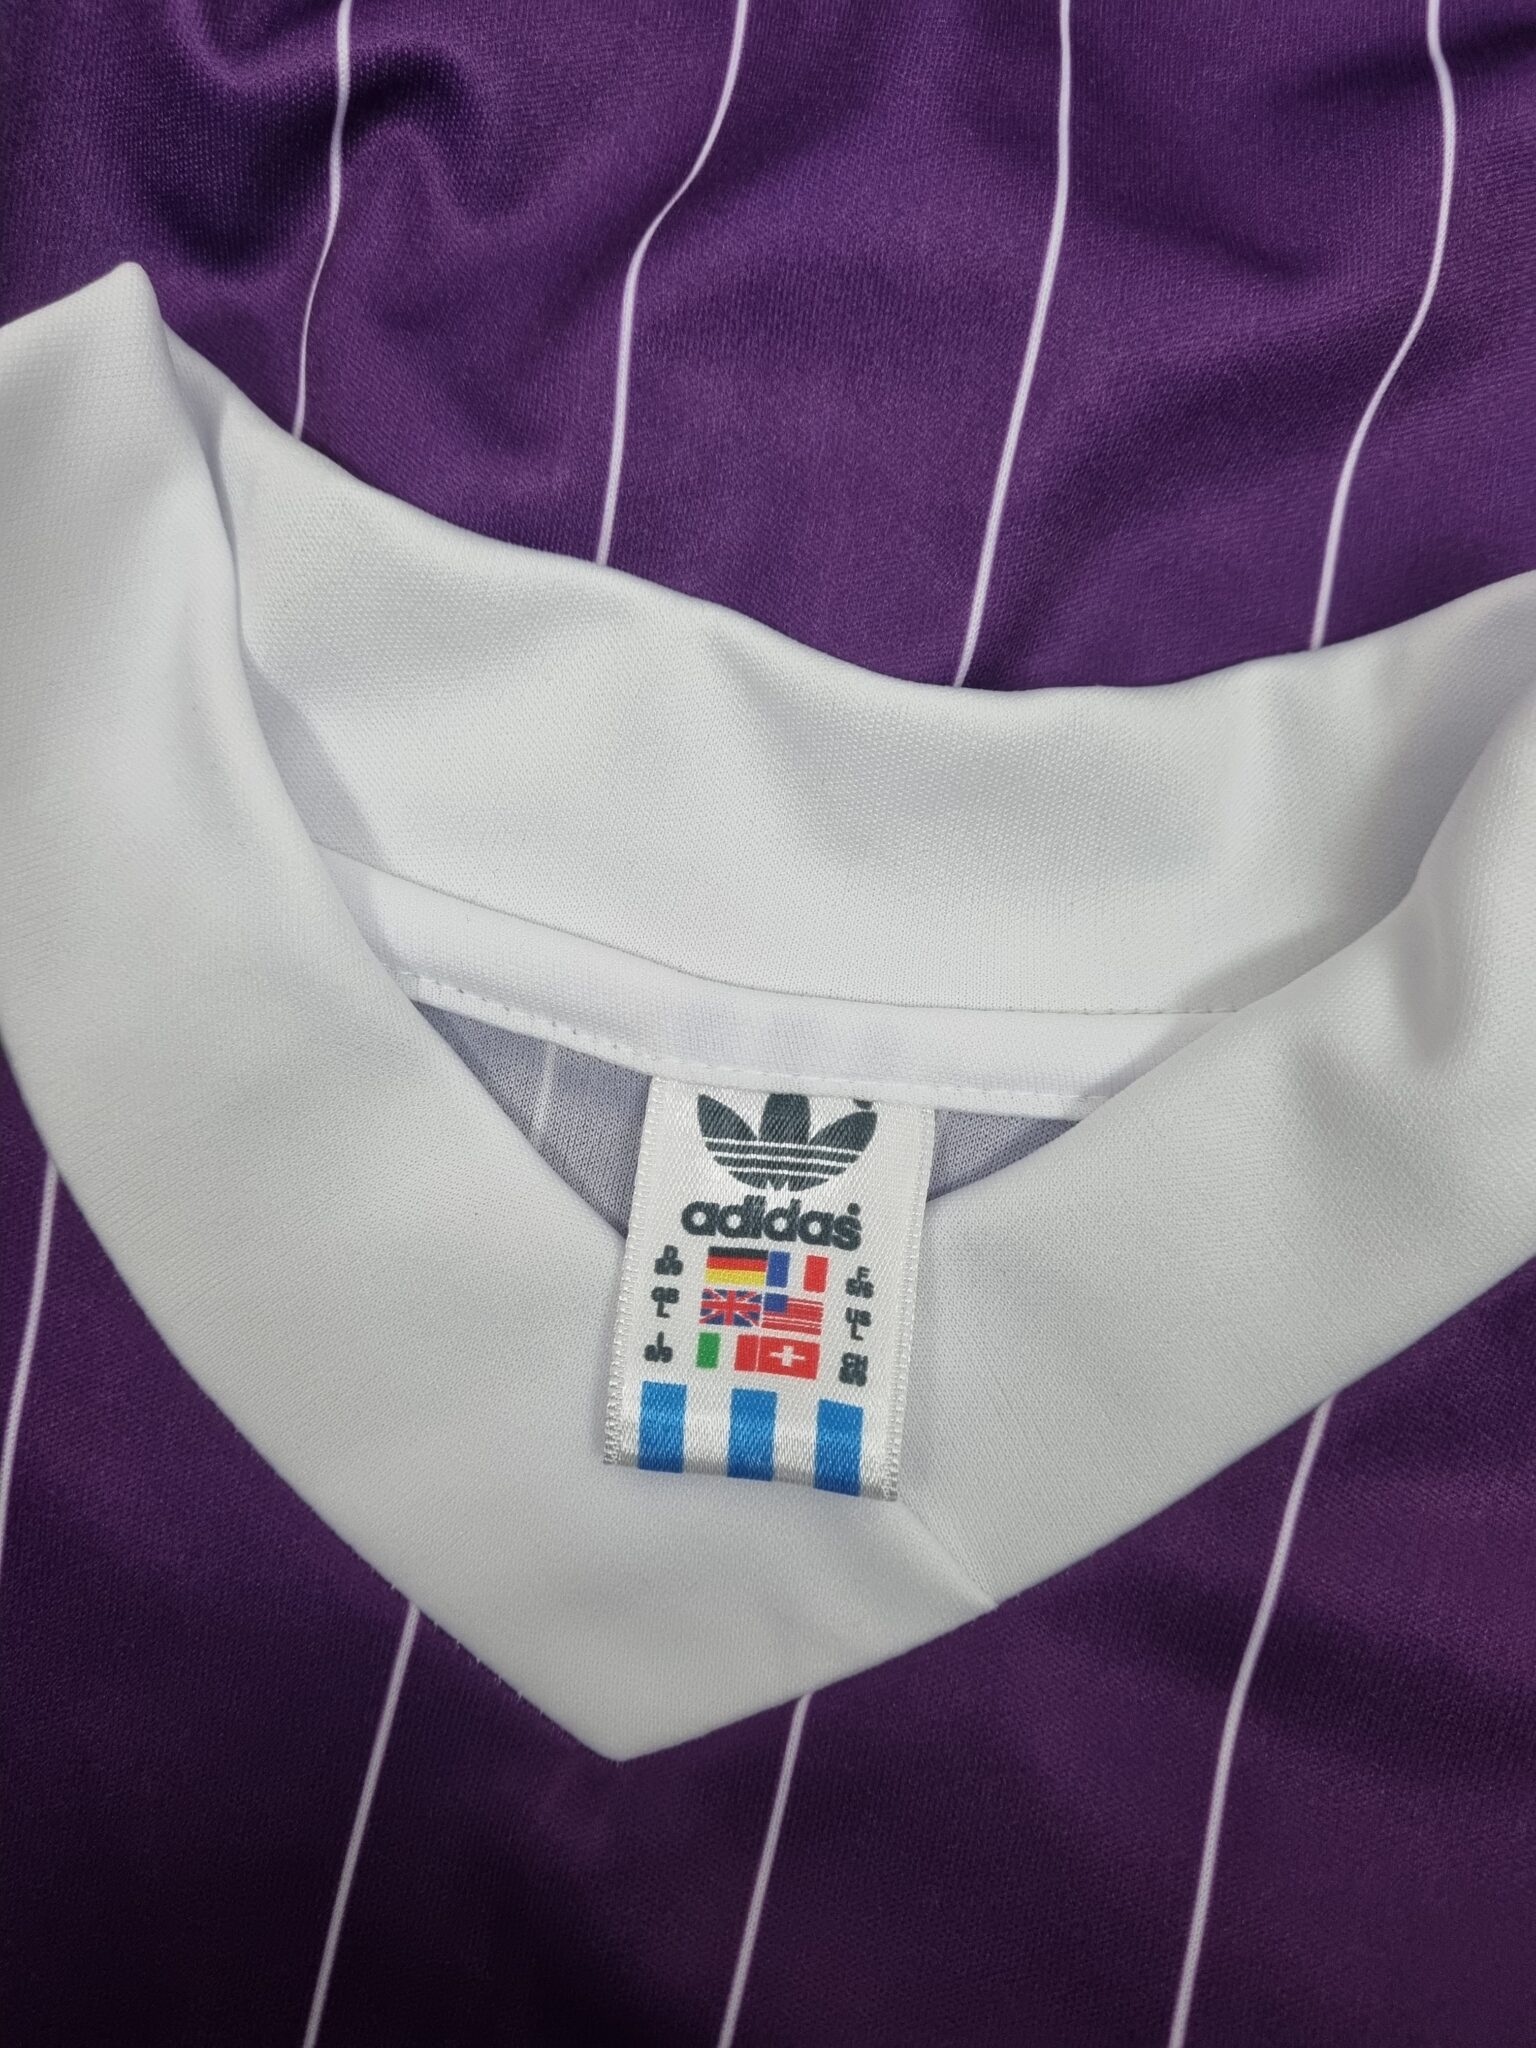 Toulouse FC Home Retro Shirt 1982/1983 Maillot Vintage Jersey France Durand #7 - Sport Club Memories